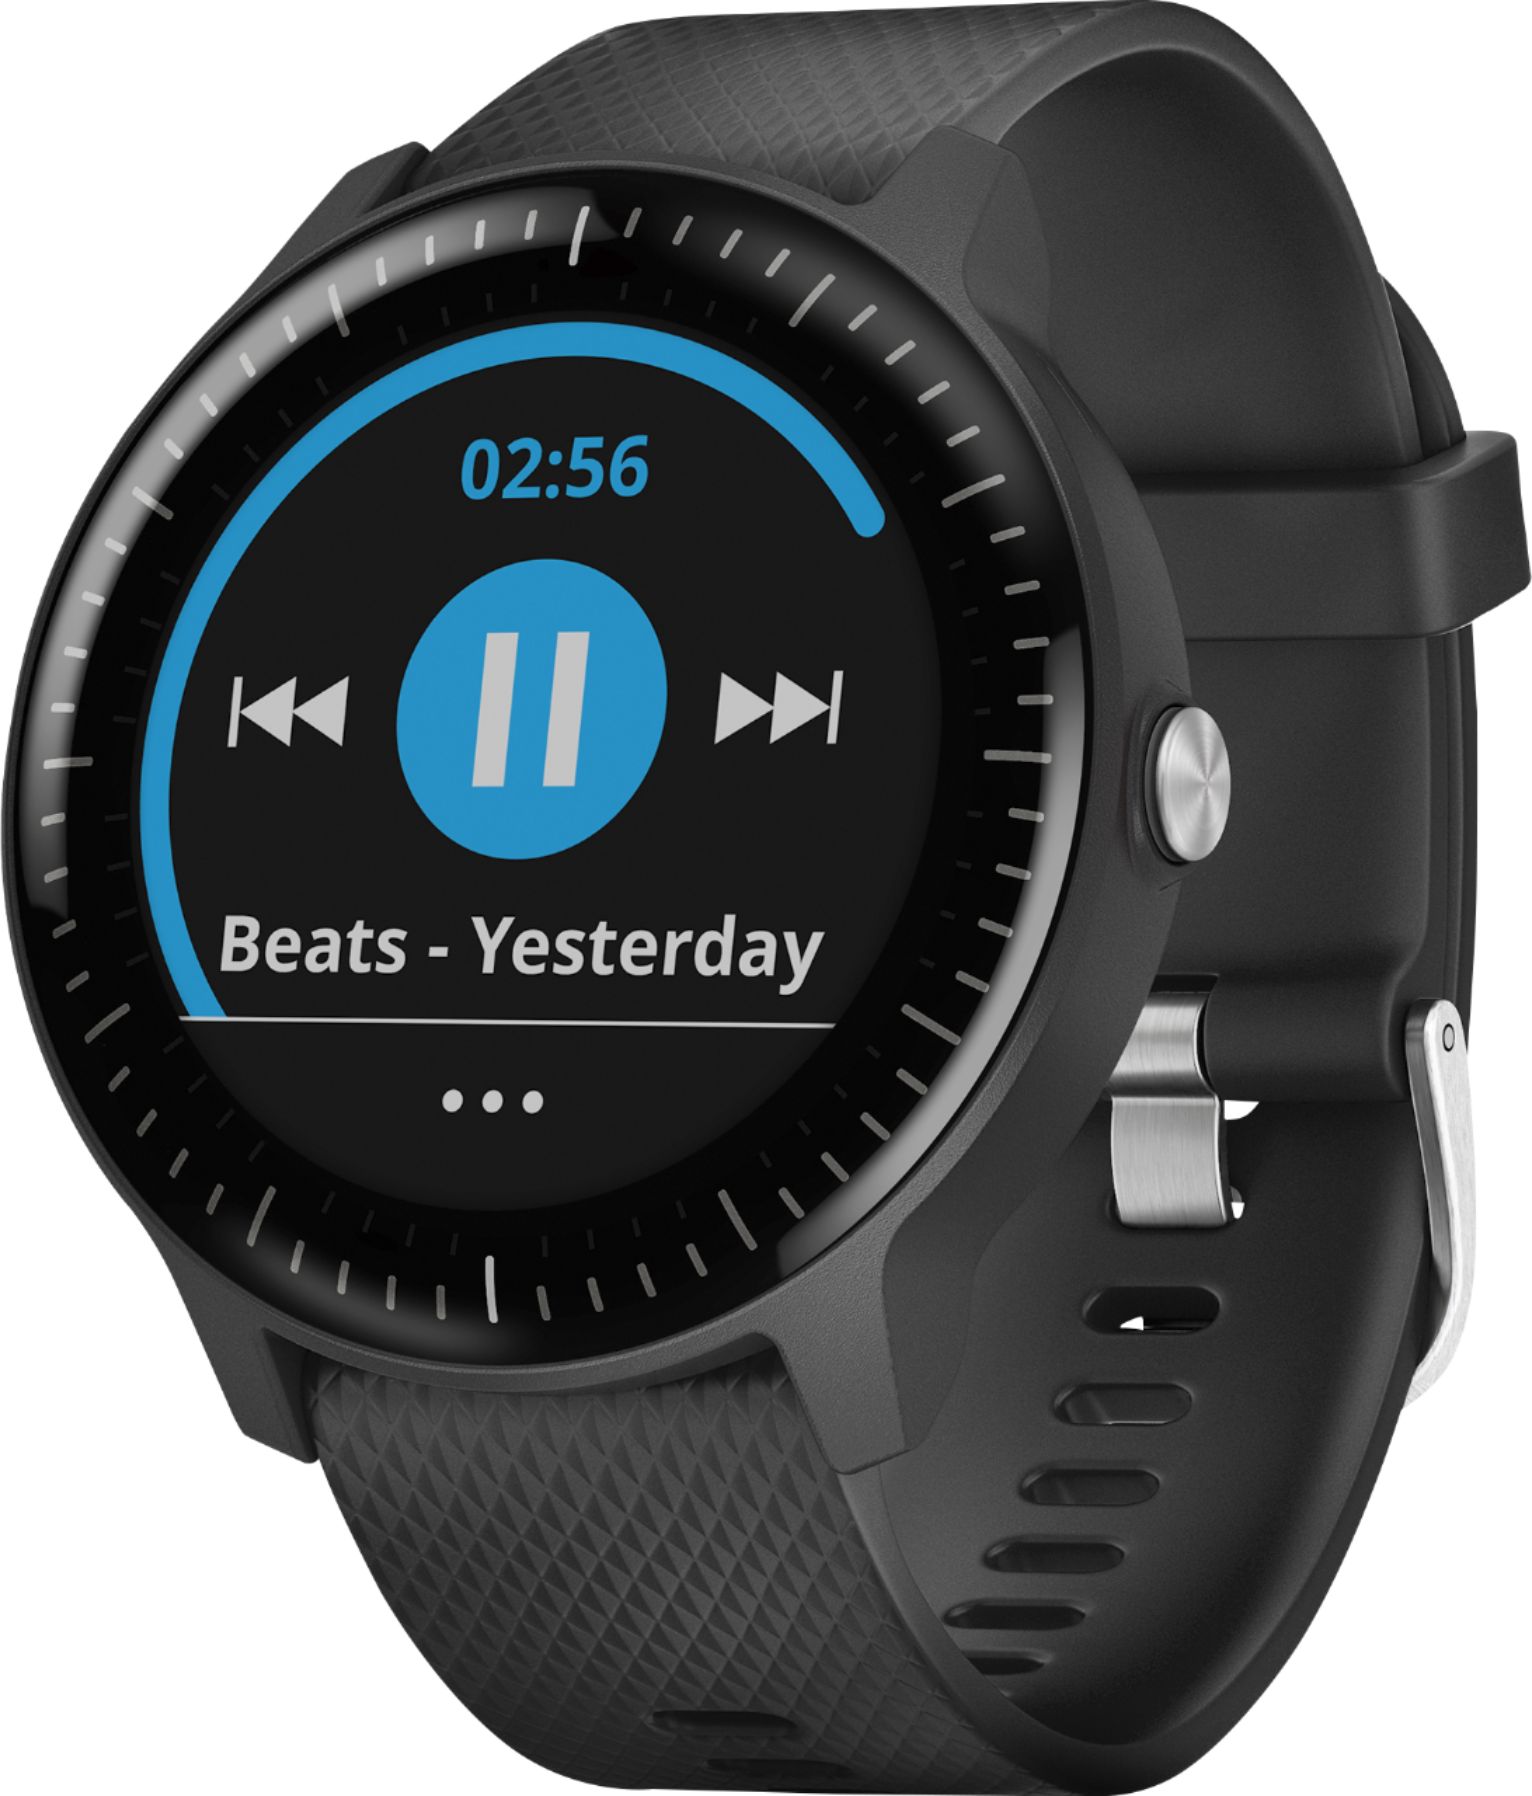 New and used Garmin Vivoactive 3 Smart Watches for sale